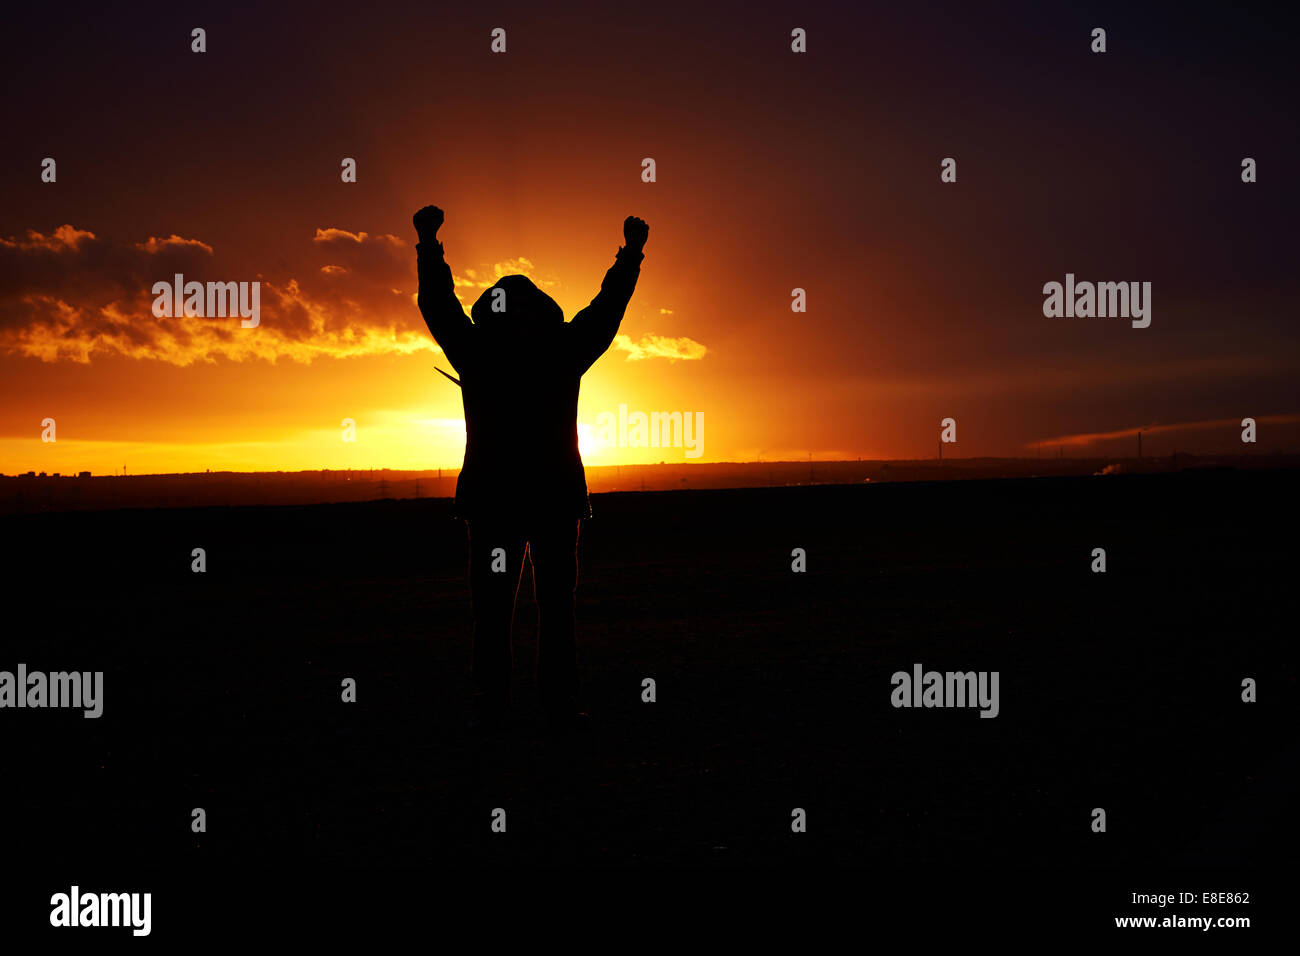 Silhouette of a man holding up his arms in jubilation behind a dark orange colored sunset. Long shot. Stock Photo